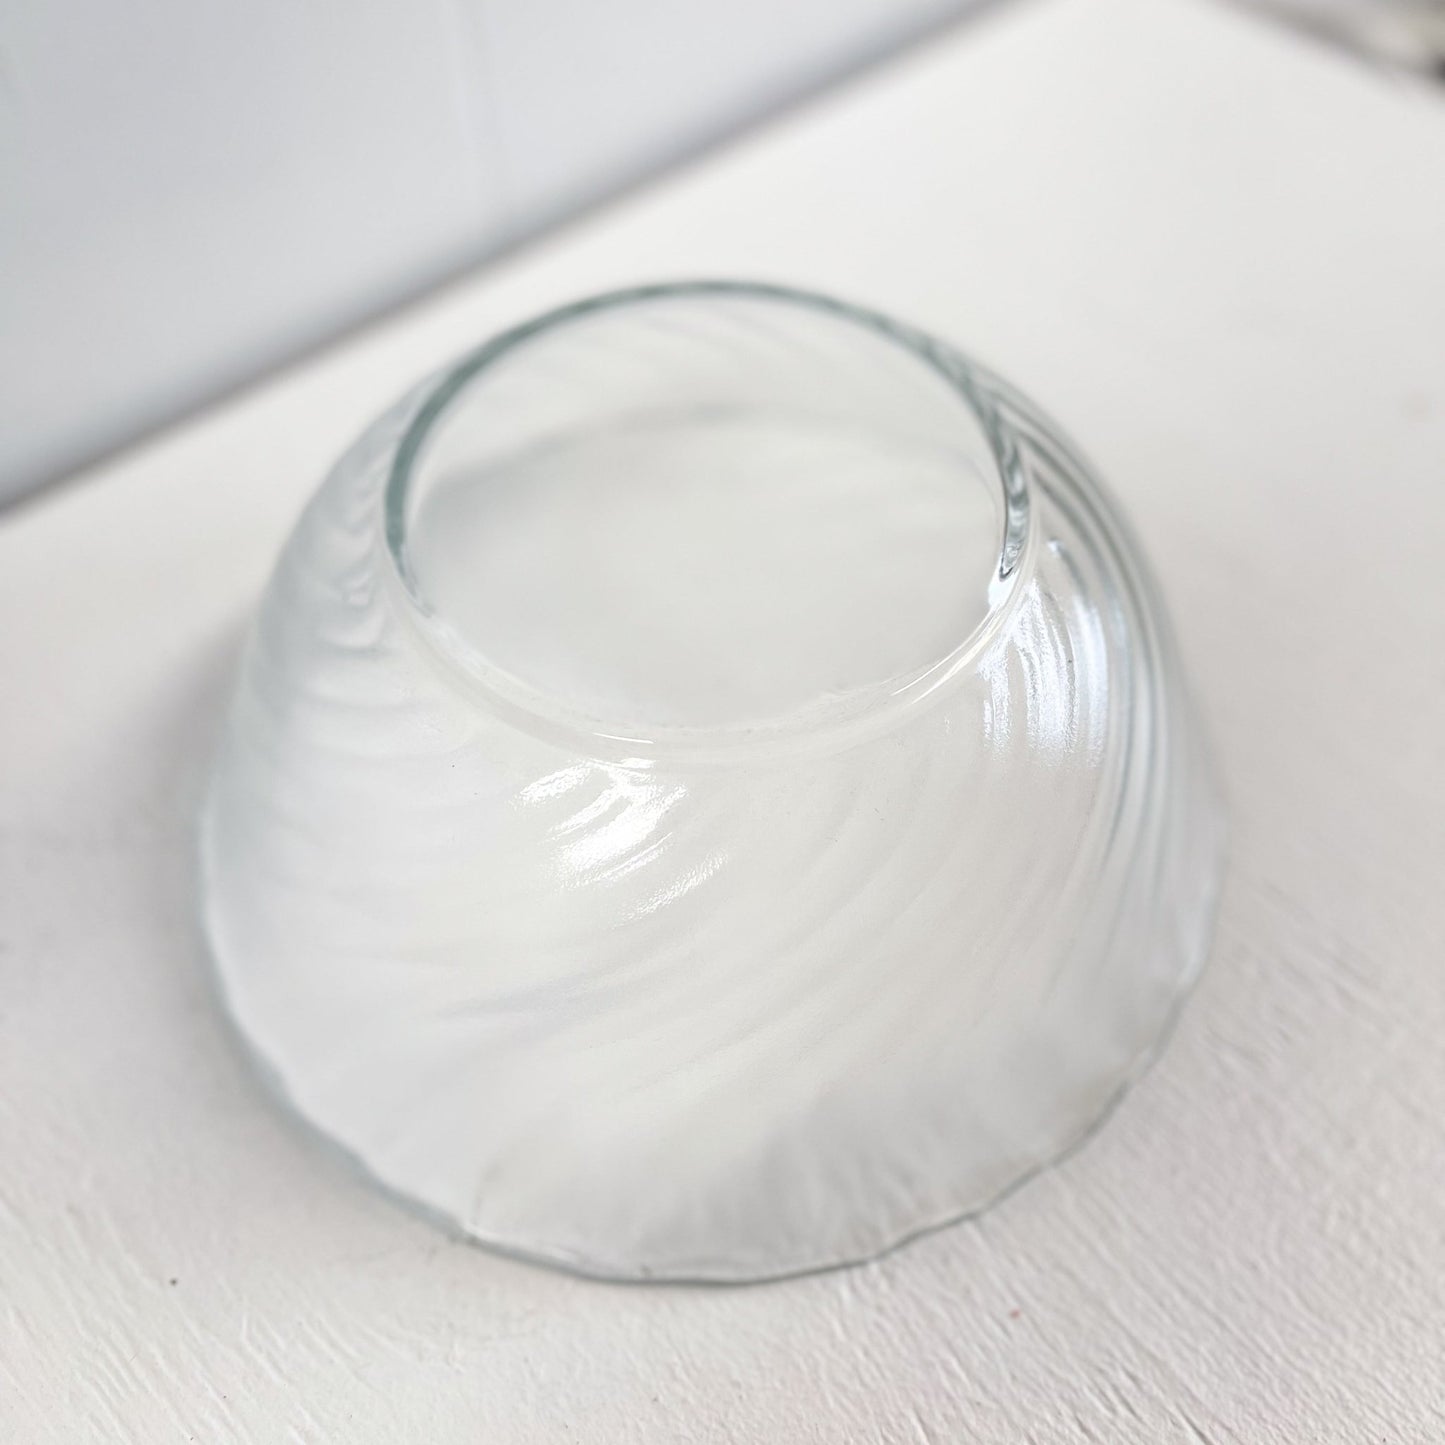 Swirl Frosted Glass Serving Bowl by Arcoroc-Arc International-Serving Bowl-Stockton Farm